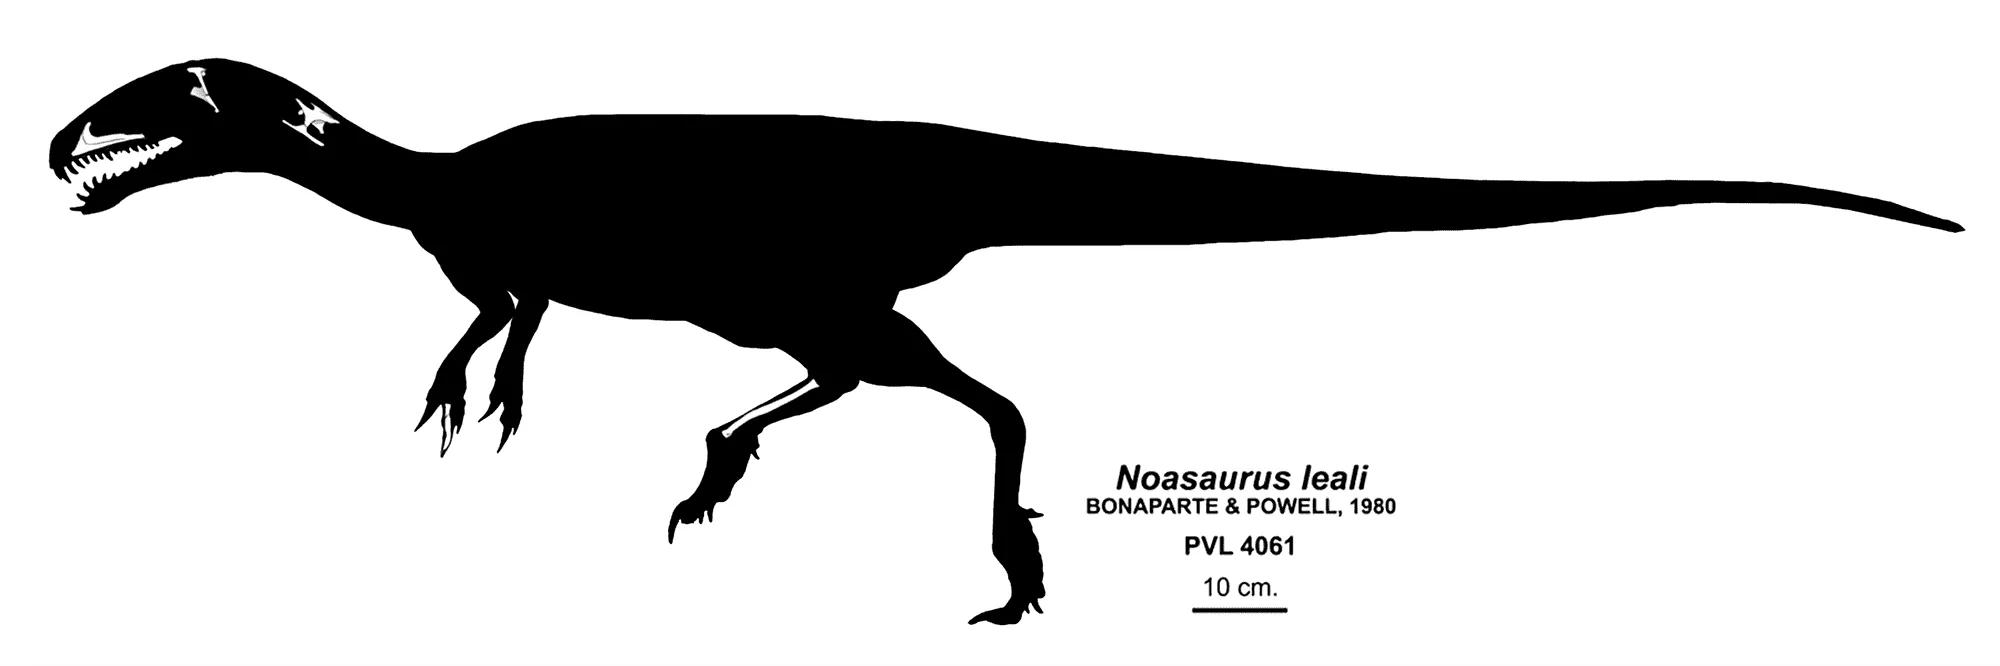 The Noasaurus dinosaur fossil was found in Argentina by Bonaparte and Powell.